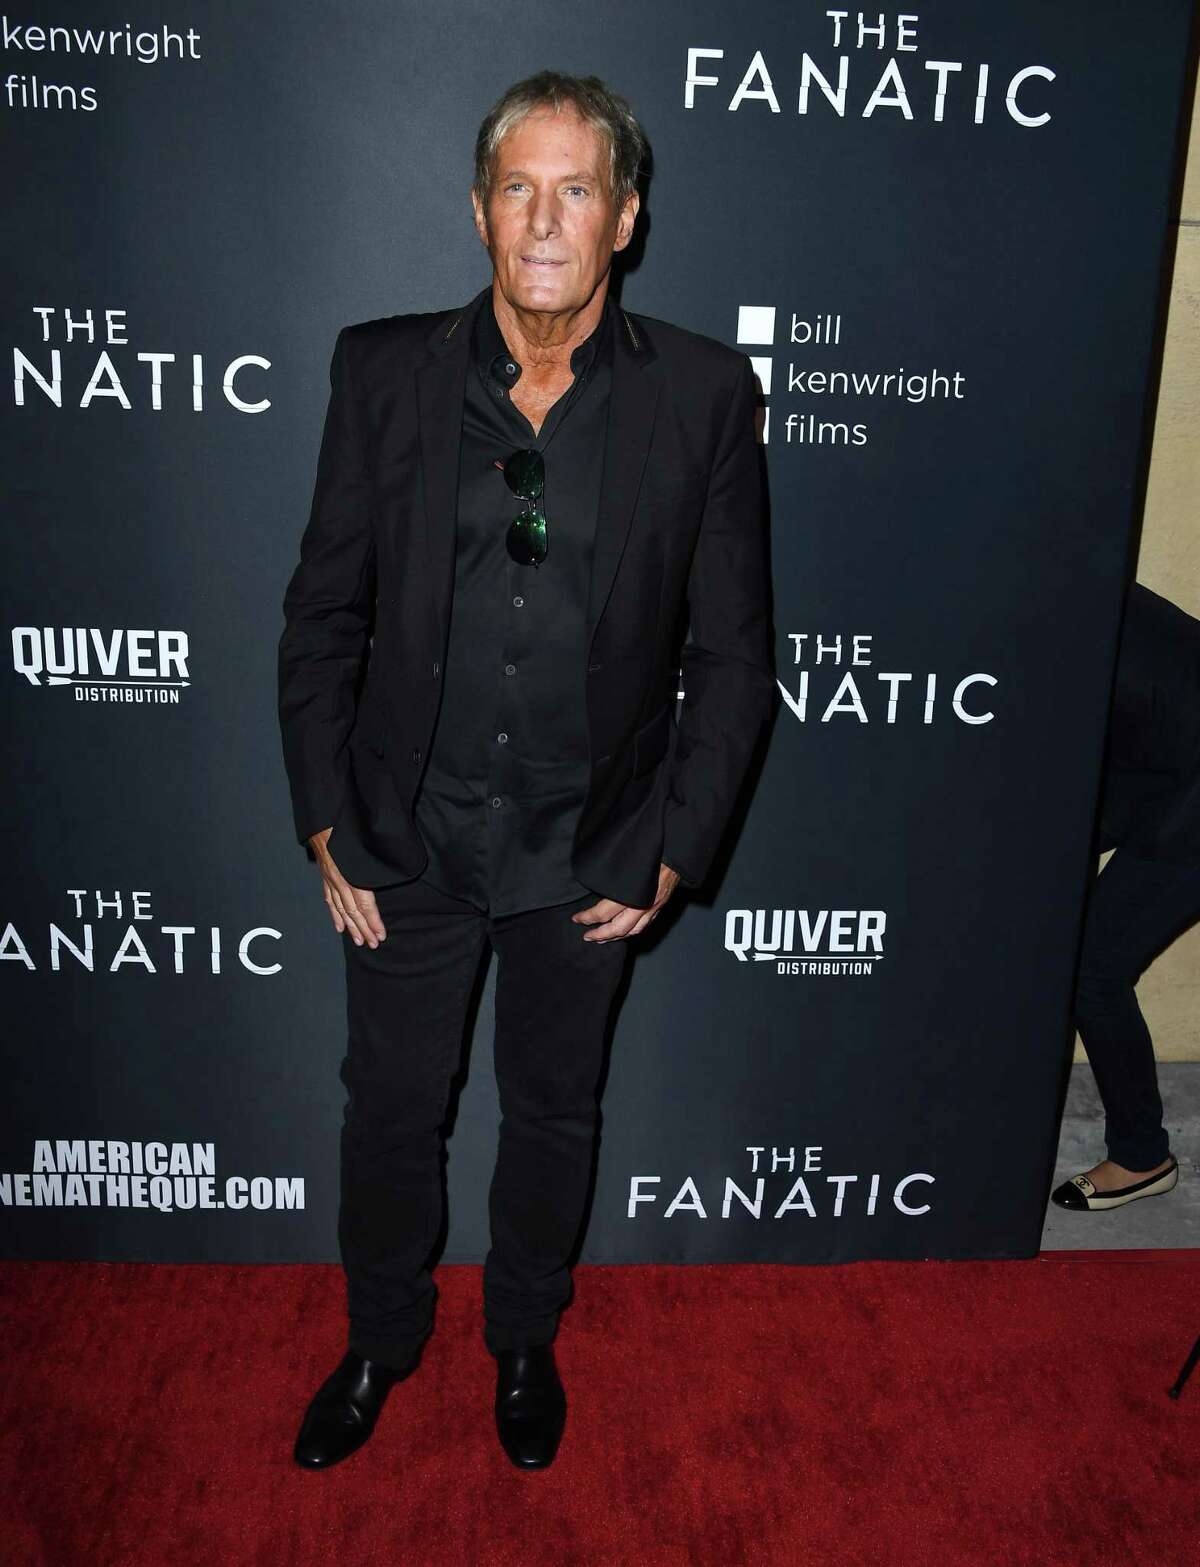 HOLLYWOOD, CALIFORNIA - AUGUST 22: Michael Bolton arrives at the Premiere Of Quiver Distribution's "The Fanatic" at the Egyptian Theatre on August 22, 2019 in Hollywood, California. (Photo by Steve Granitz/WireImage,)